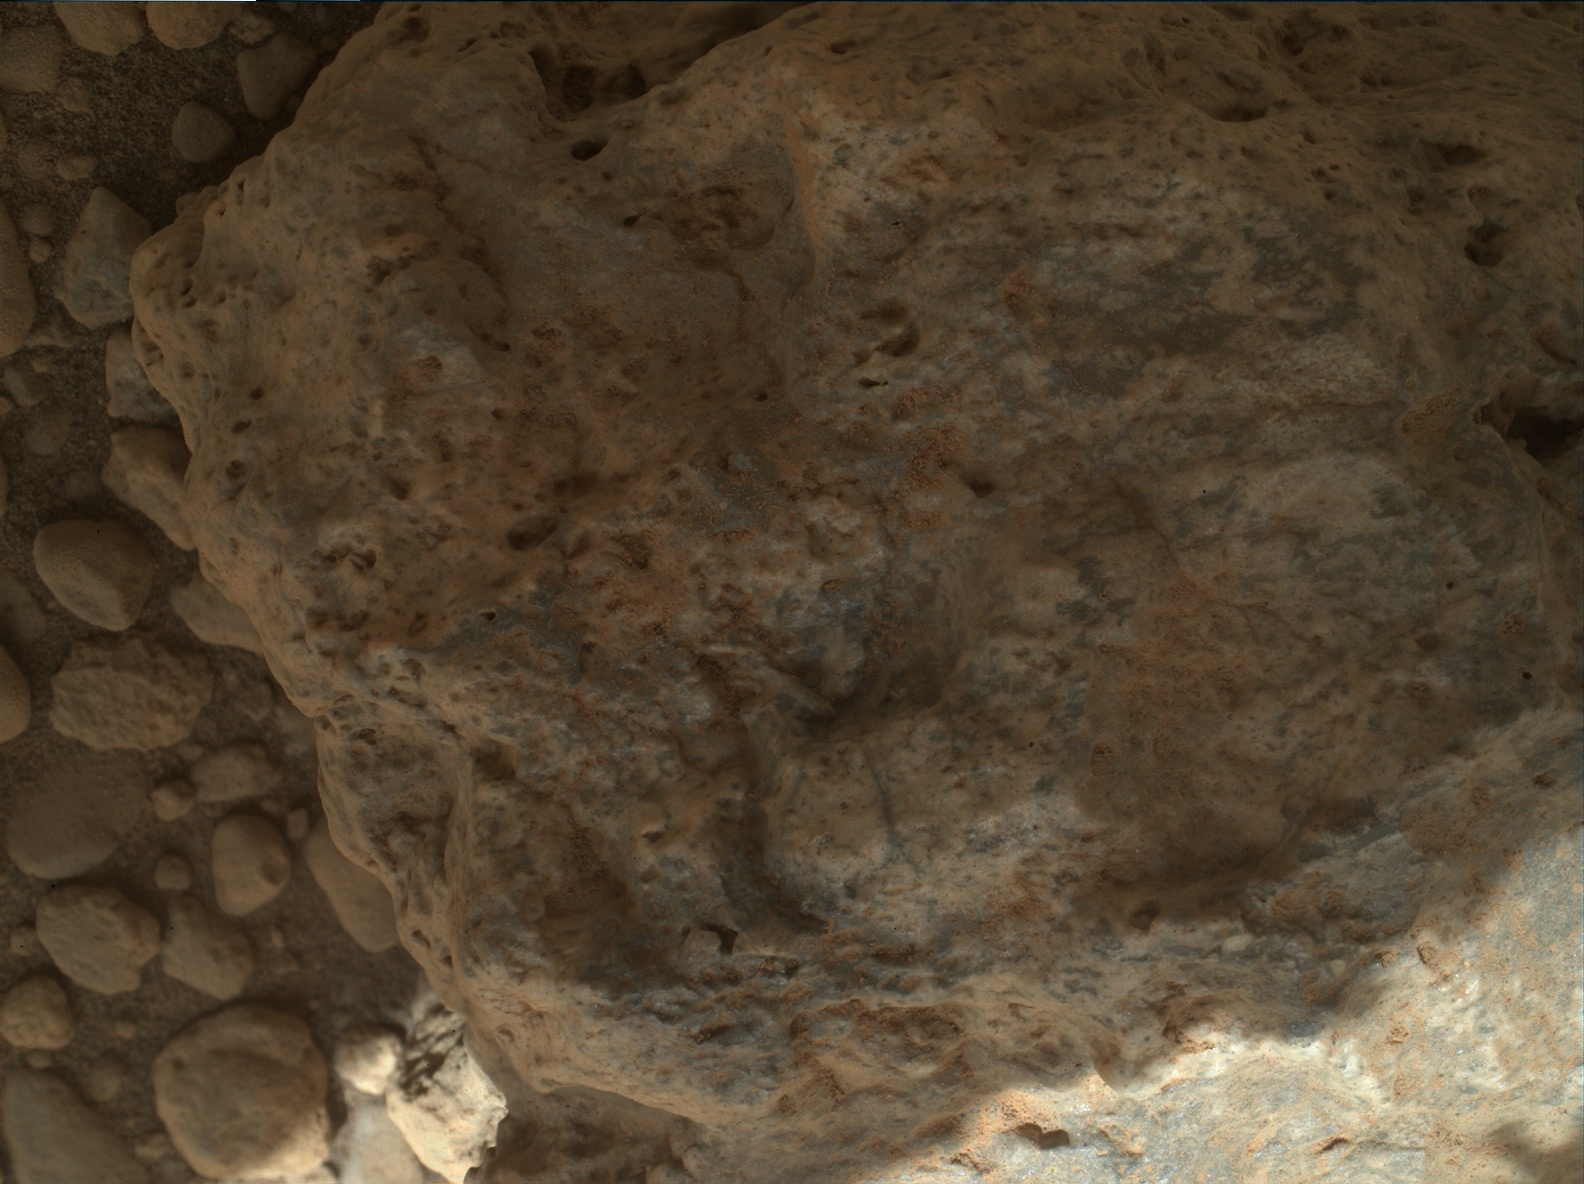 Nasa's Mars rover Curiosity acquired this image using its Mars Hand Lens Imager (MAHLI) on Sol 512